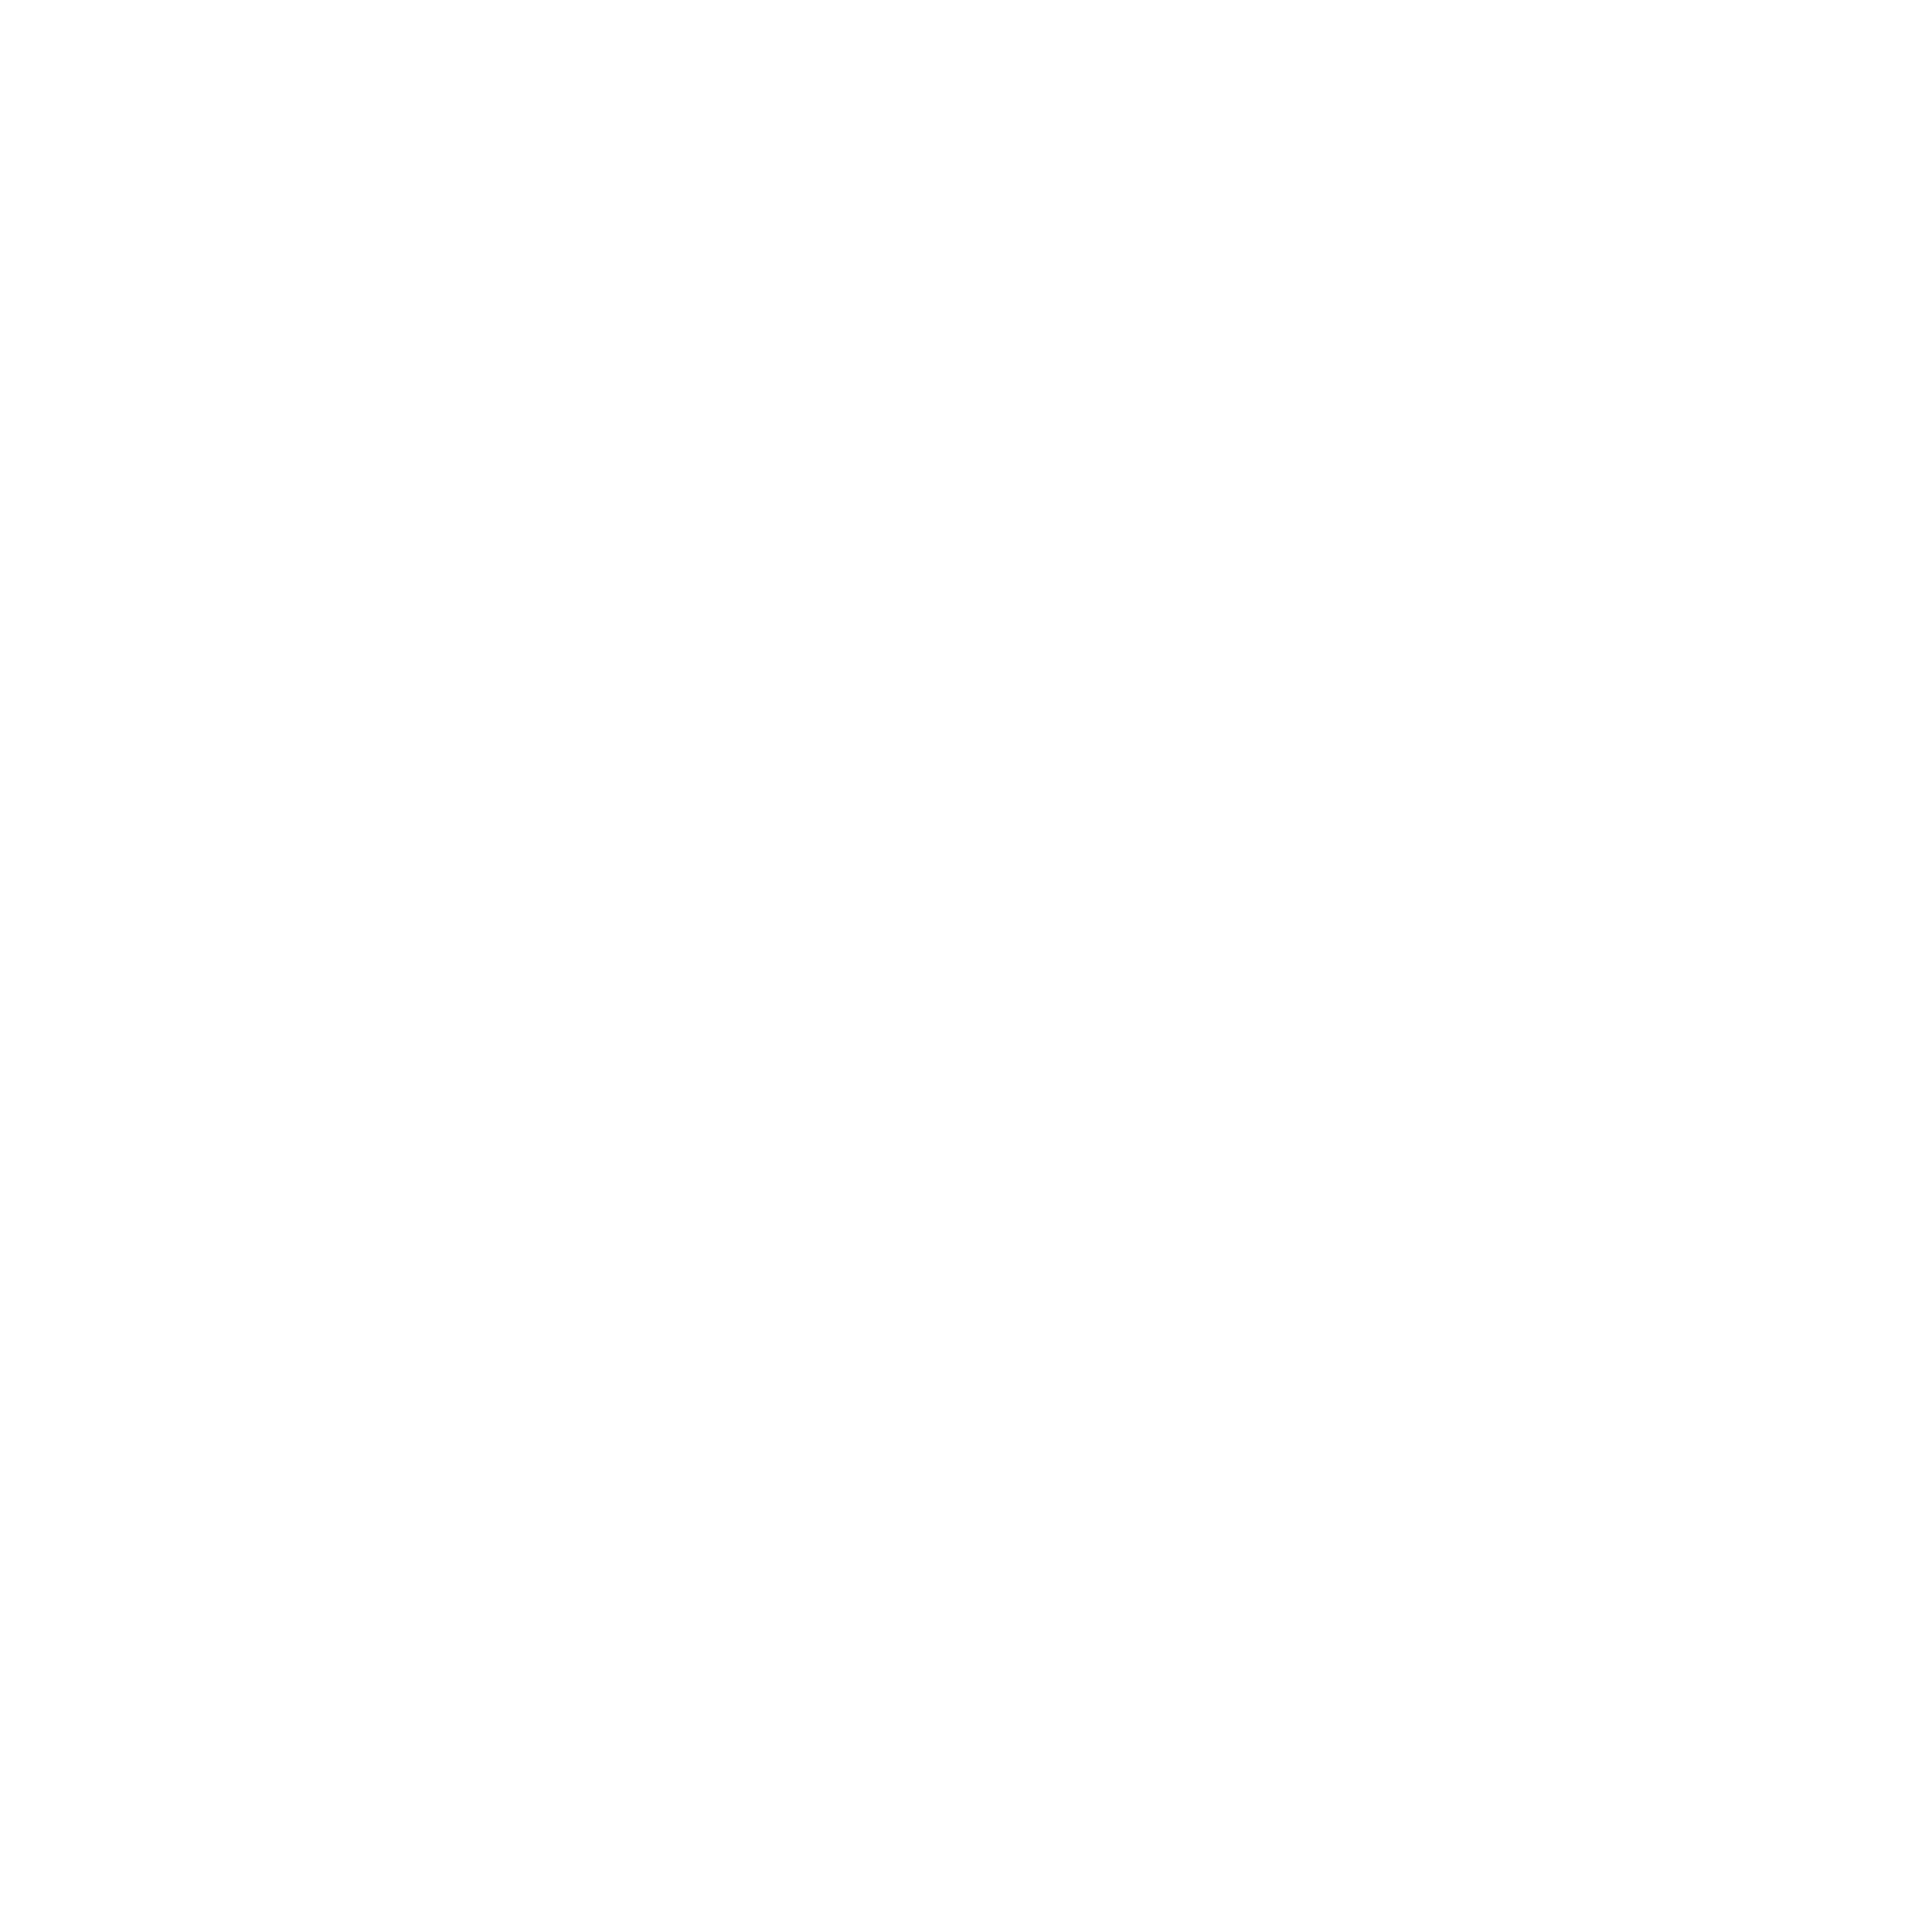 Try on hauls at Luxechic Couture Boutique 